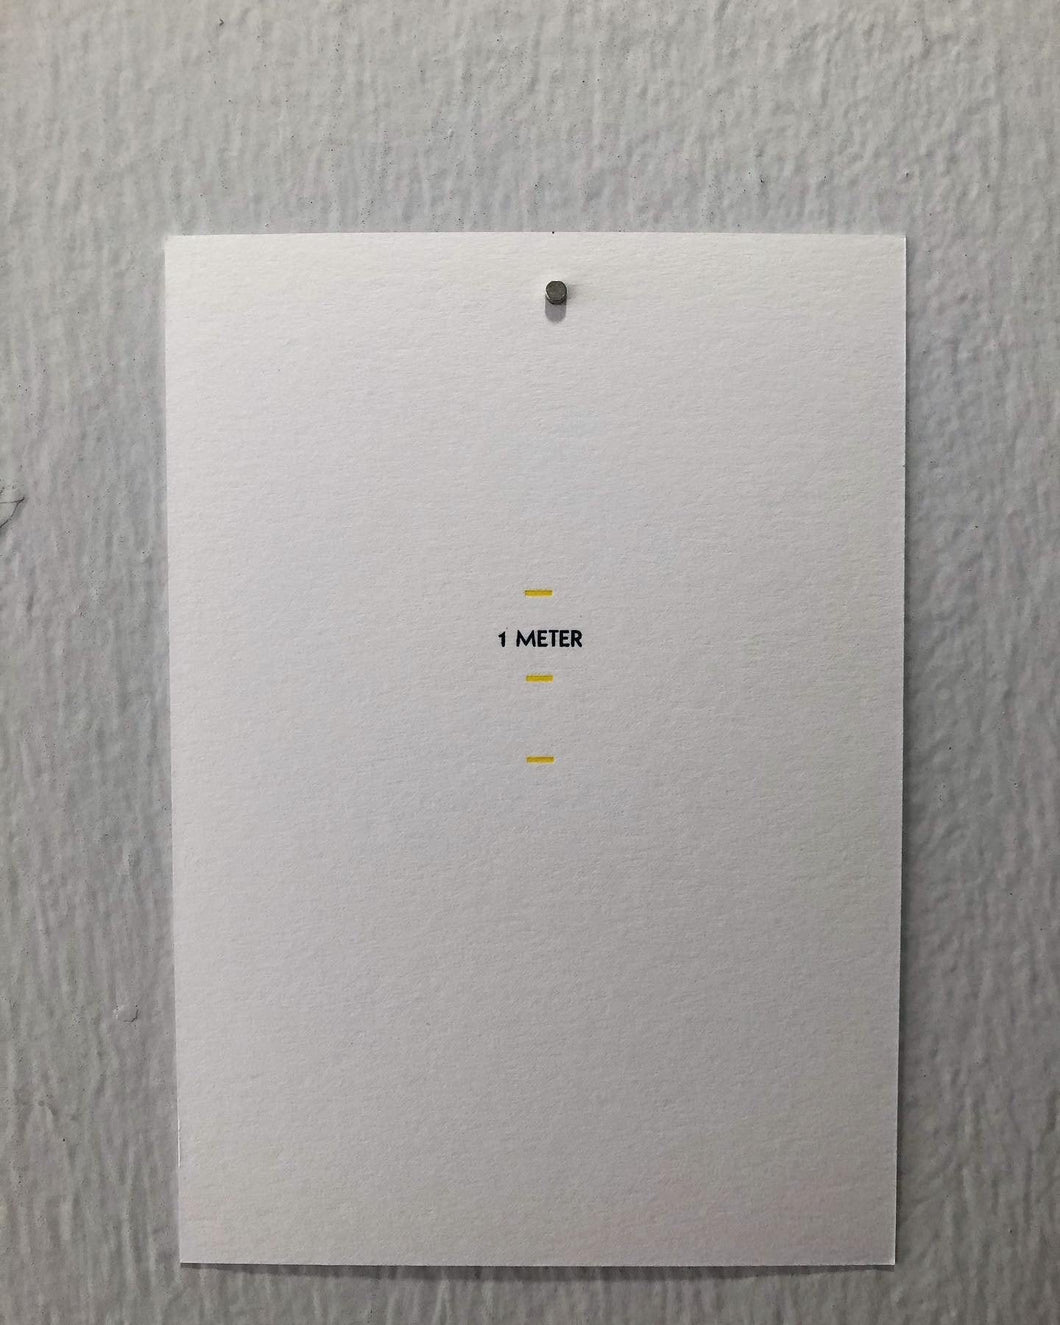 Letterpress A6 card COVID-19 SG Yellow Tape - 1 meter apart (Queuing)